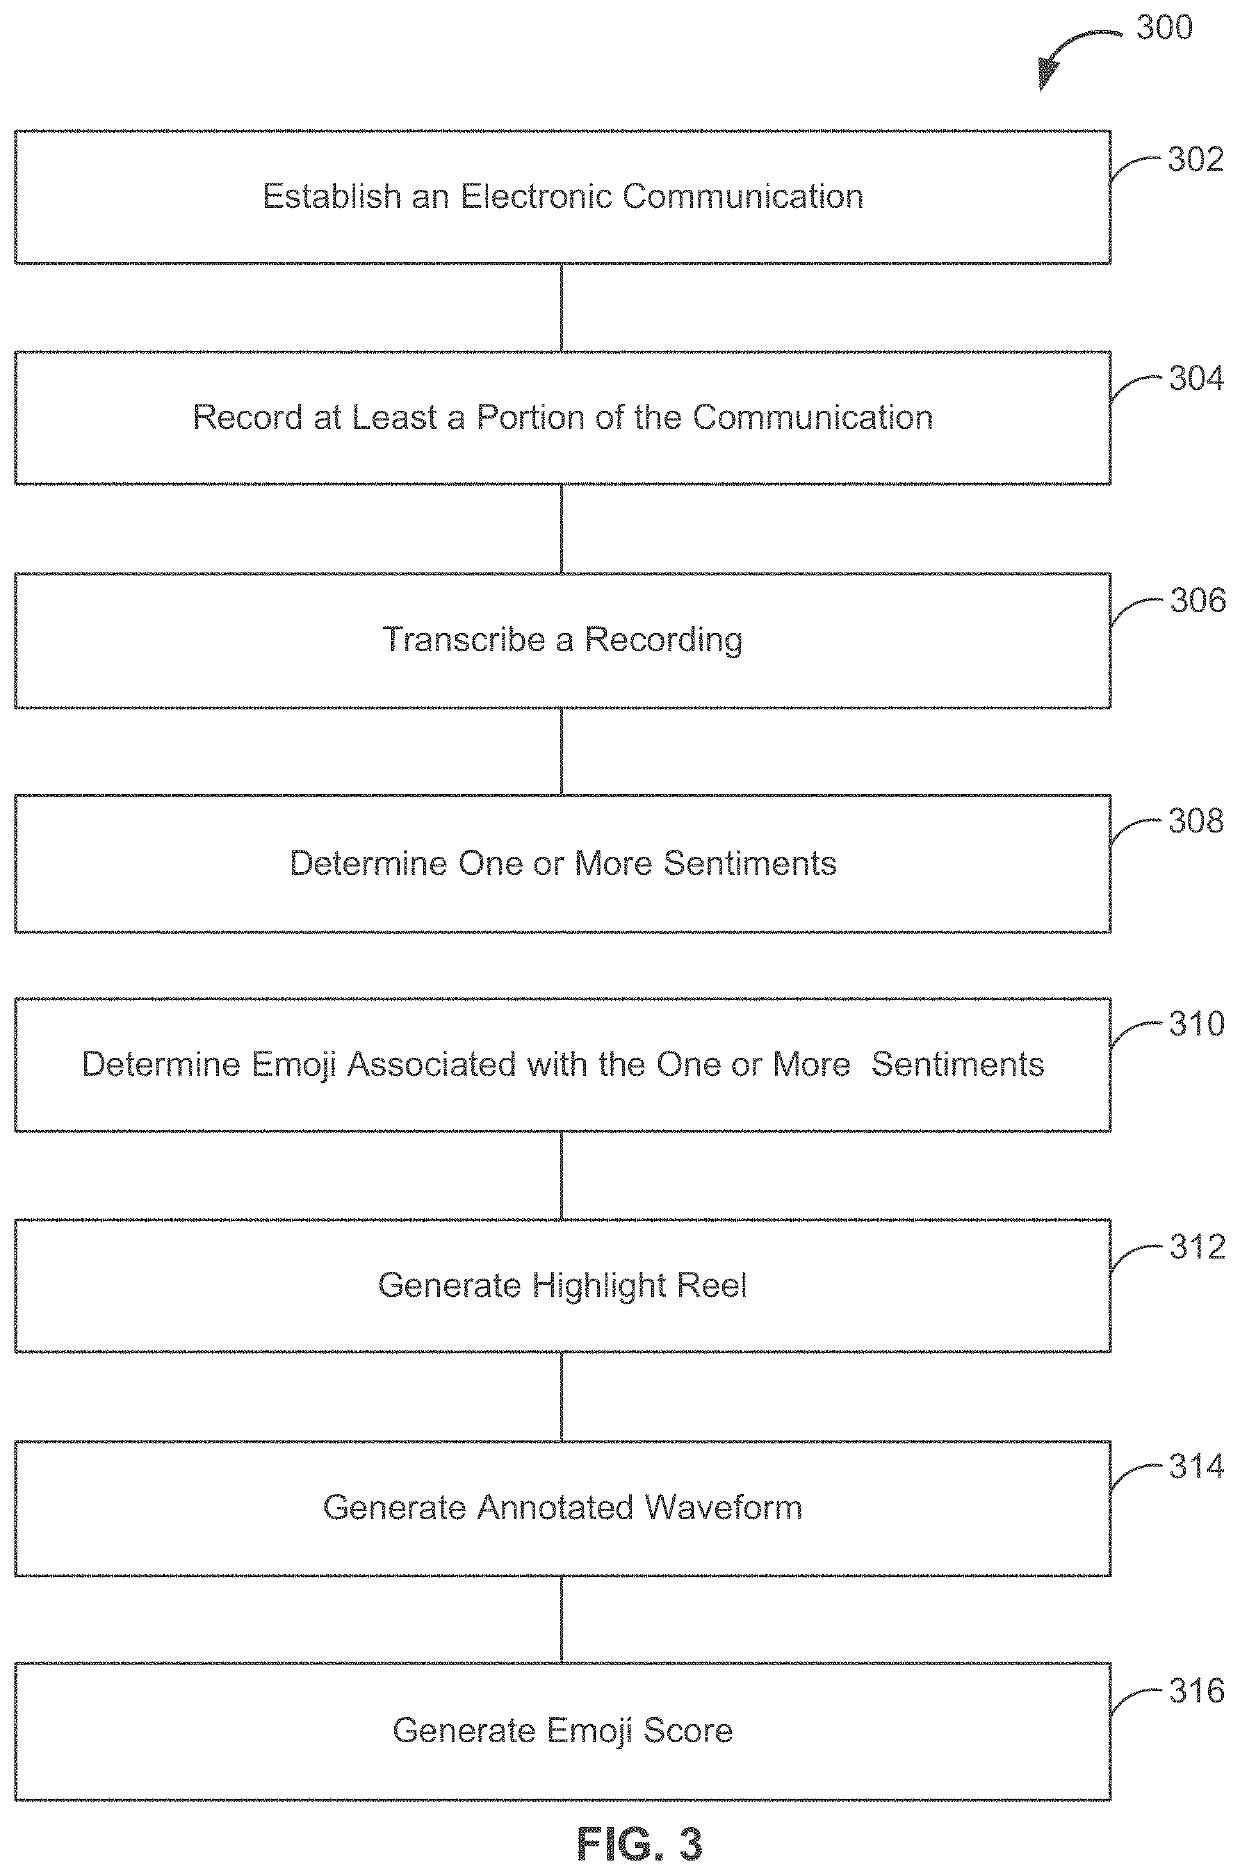 Electronic communication system and method with sentiment analysis